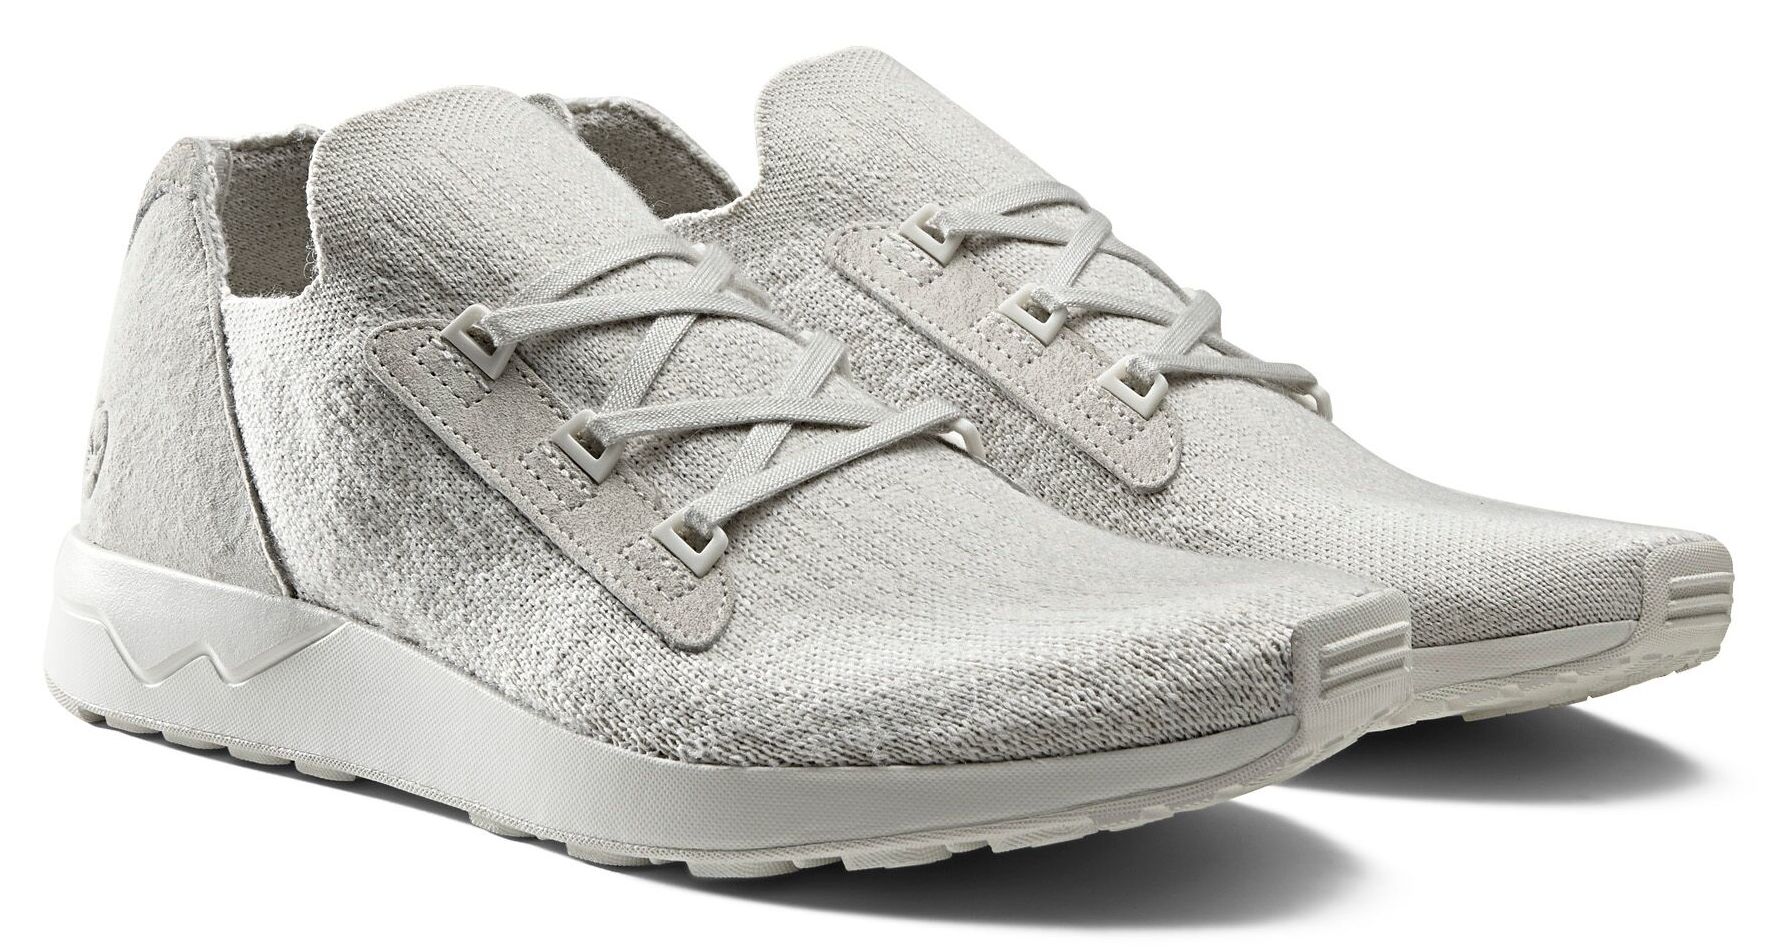 Wings + Horns & adidas Deliver a Premium Sneaker Collection